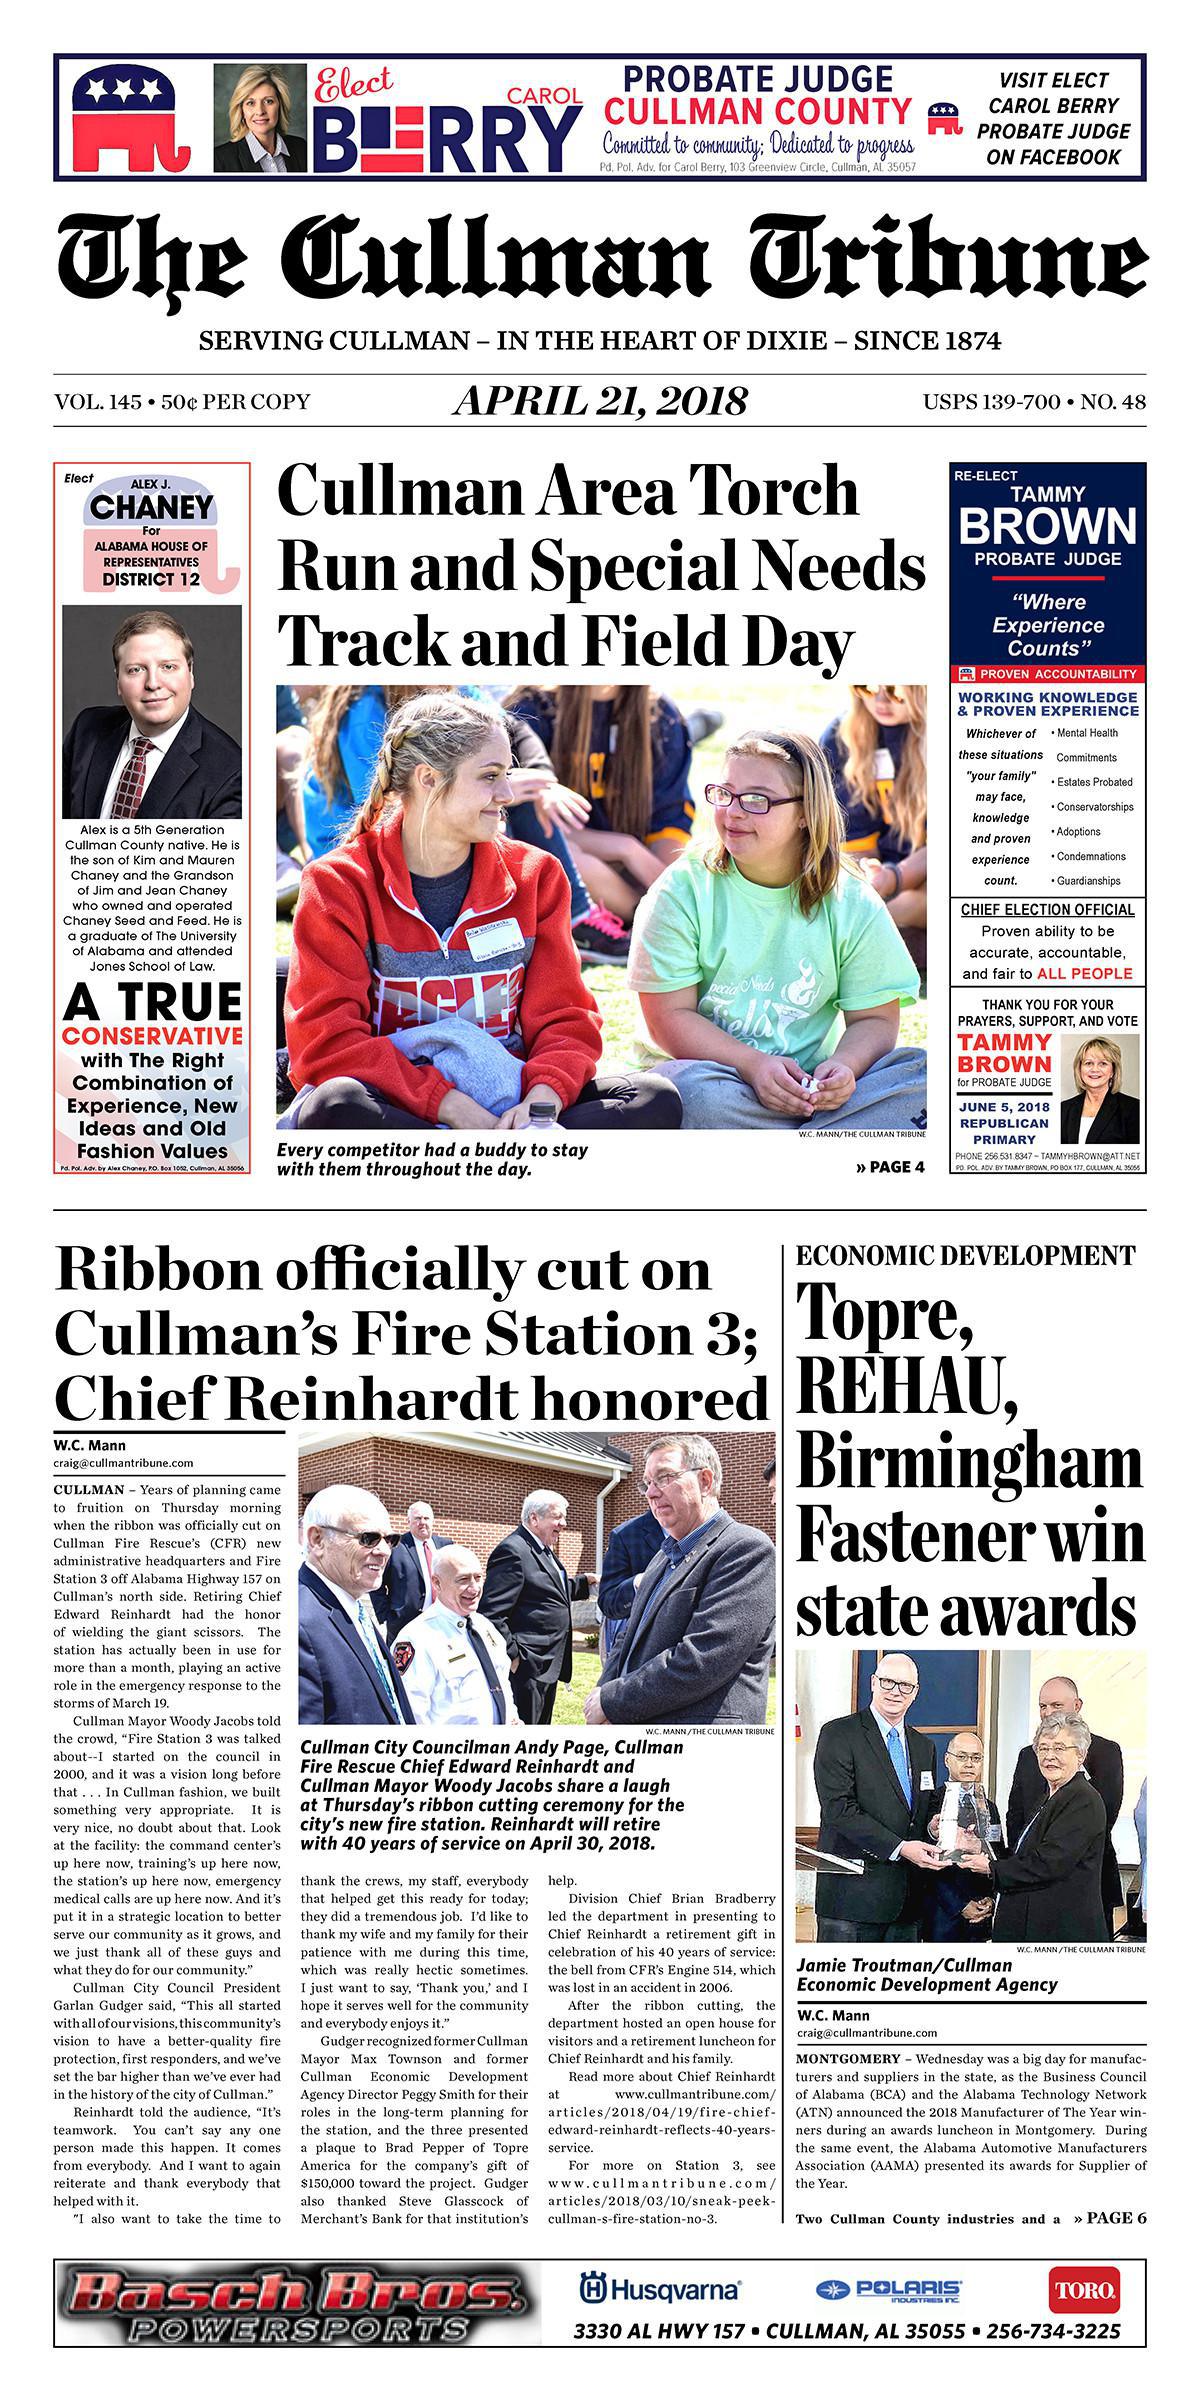 Good Morning Cullman! The 04-21-2018 edition of the Cullman Tribune is now ready to view